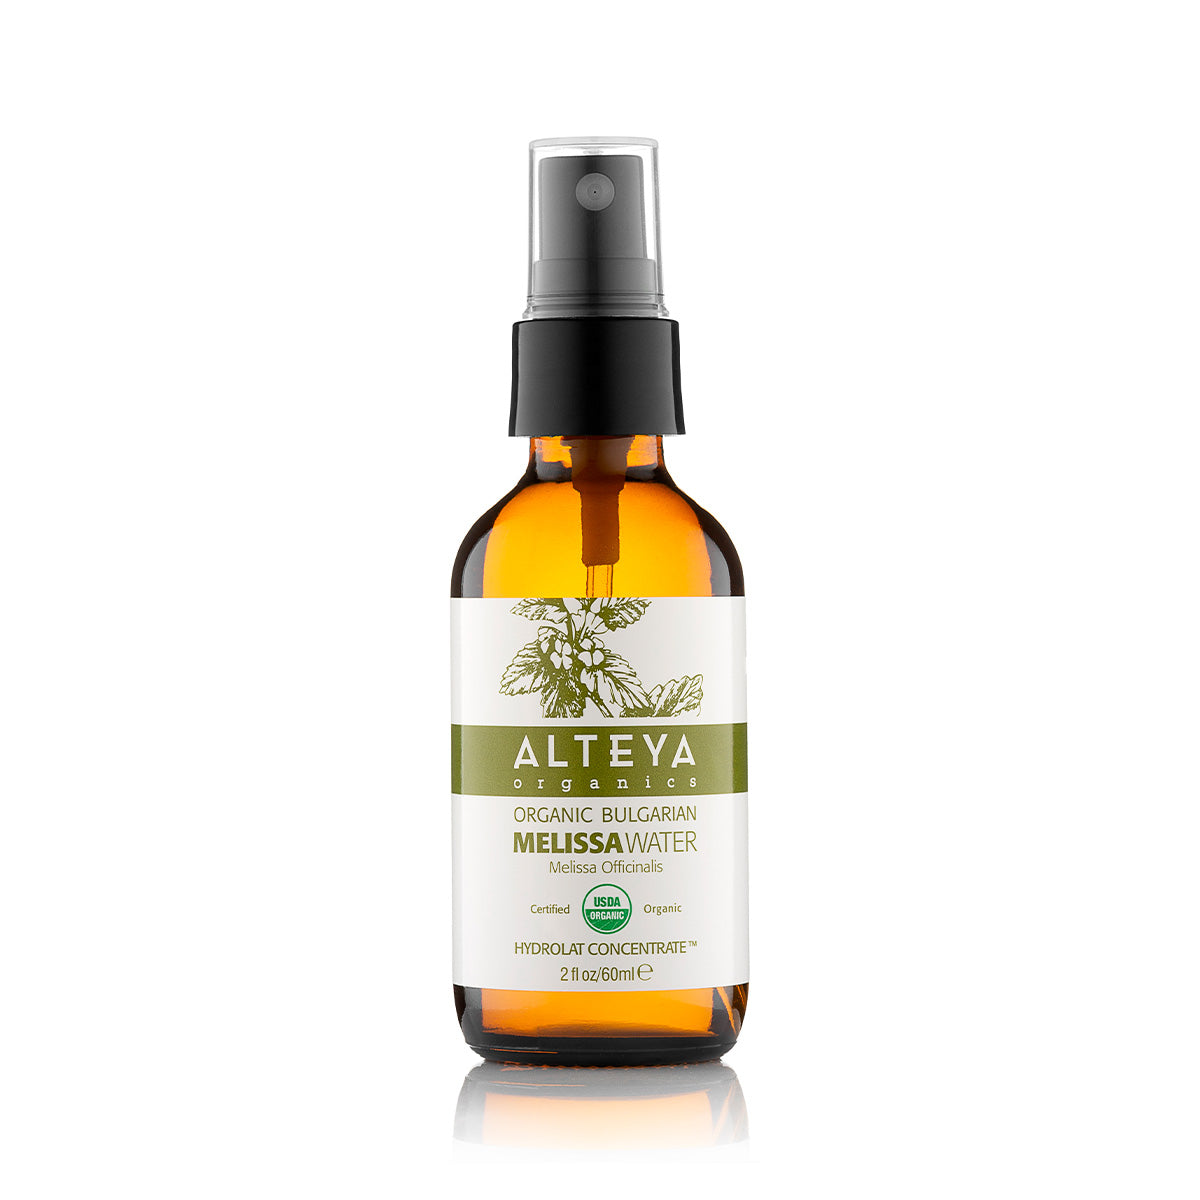 organic bulgarian melissa water – amber glass bottle  - Alteya’s 100% pure Melissa Flower Water is obtained by steam distillation of fresh, organic Melissa flowers. This very gentle flower water helps awaken and tone dull skin. It is also useful for troublesome skin and helps against skin irritation and inflammation. Its pleasant, fresh, lemony scent uplifts the spirits and revitalizes the mind.